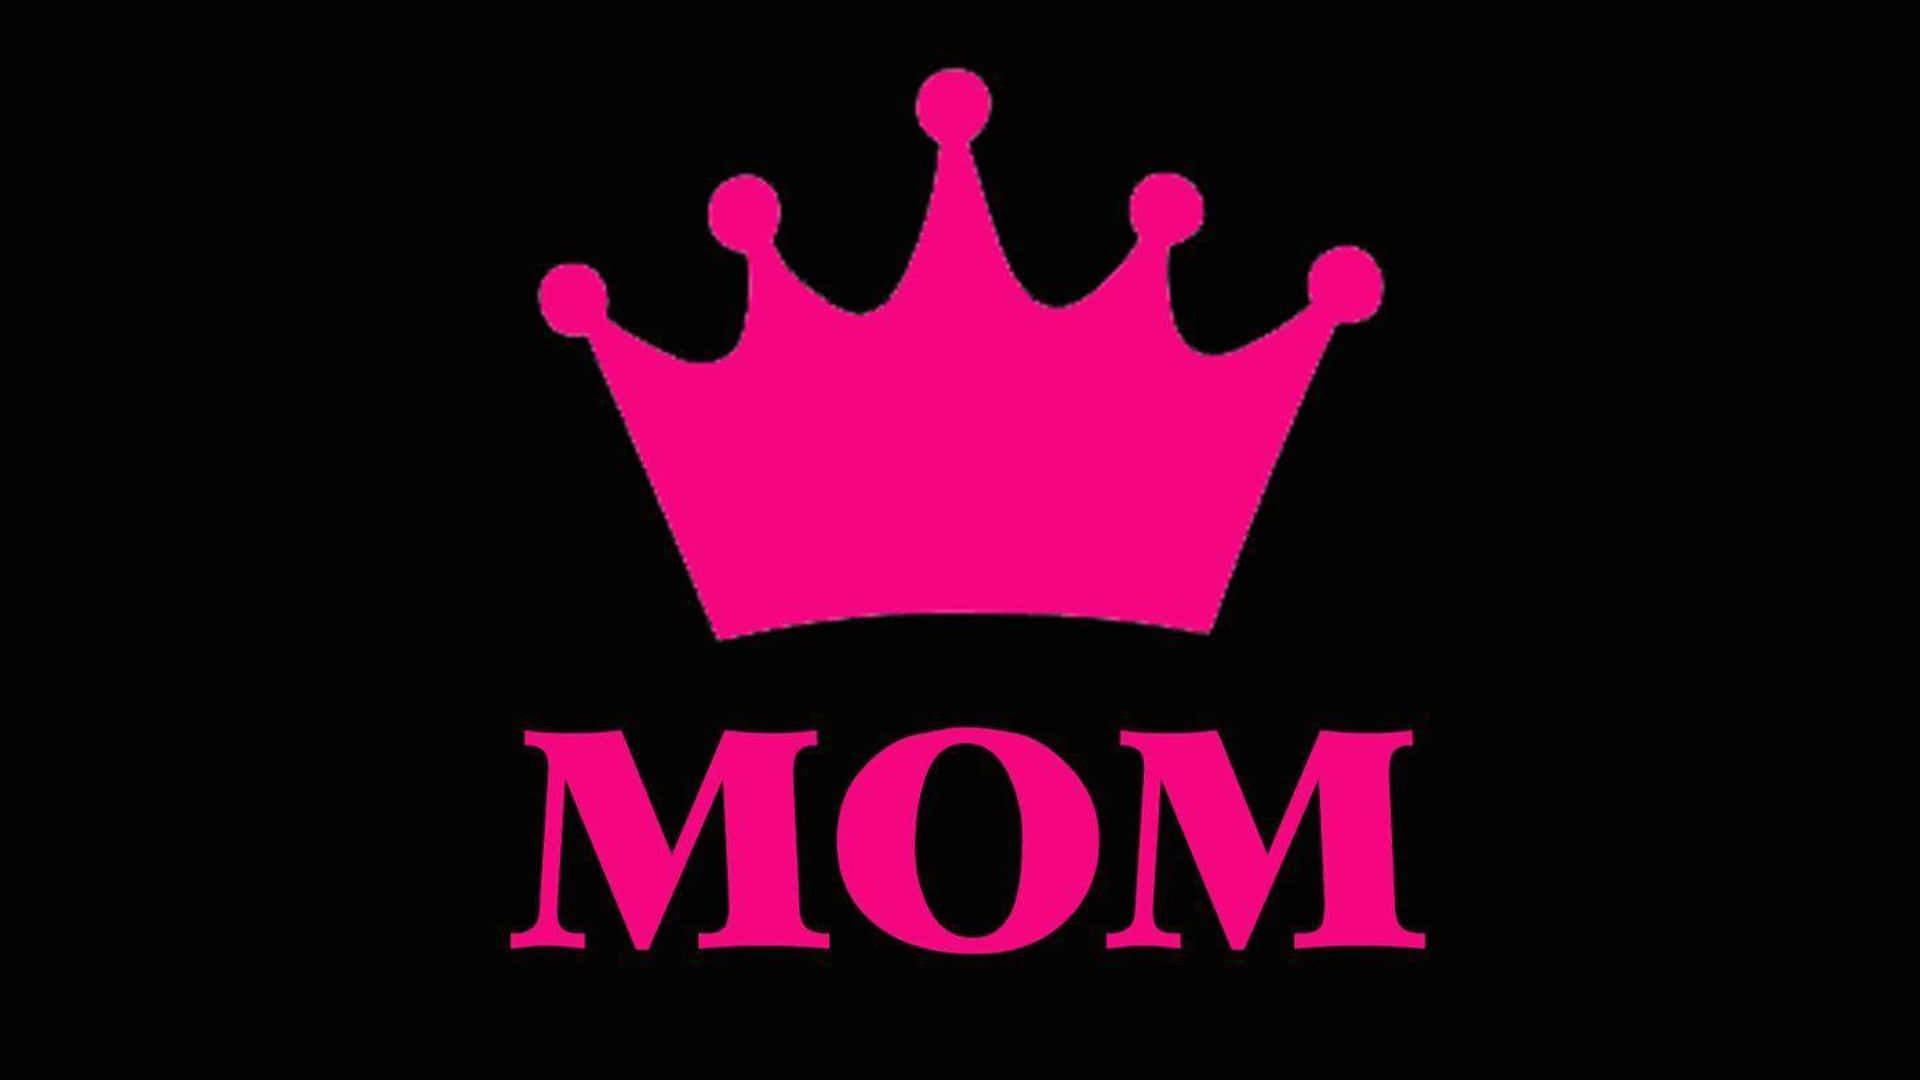 Pink Crown Mom Graphic Wallpaper